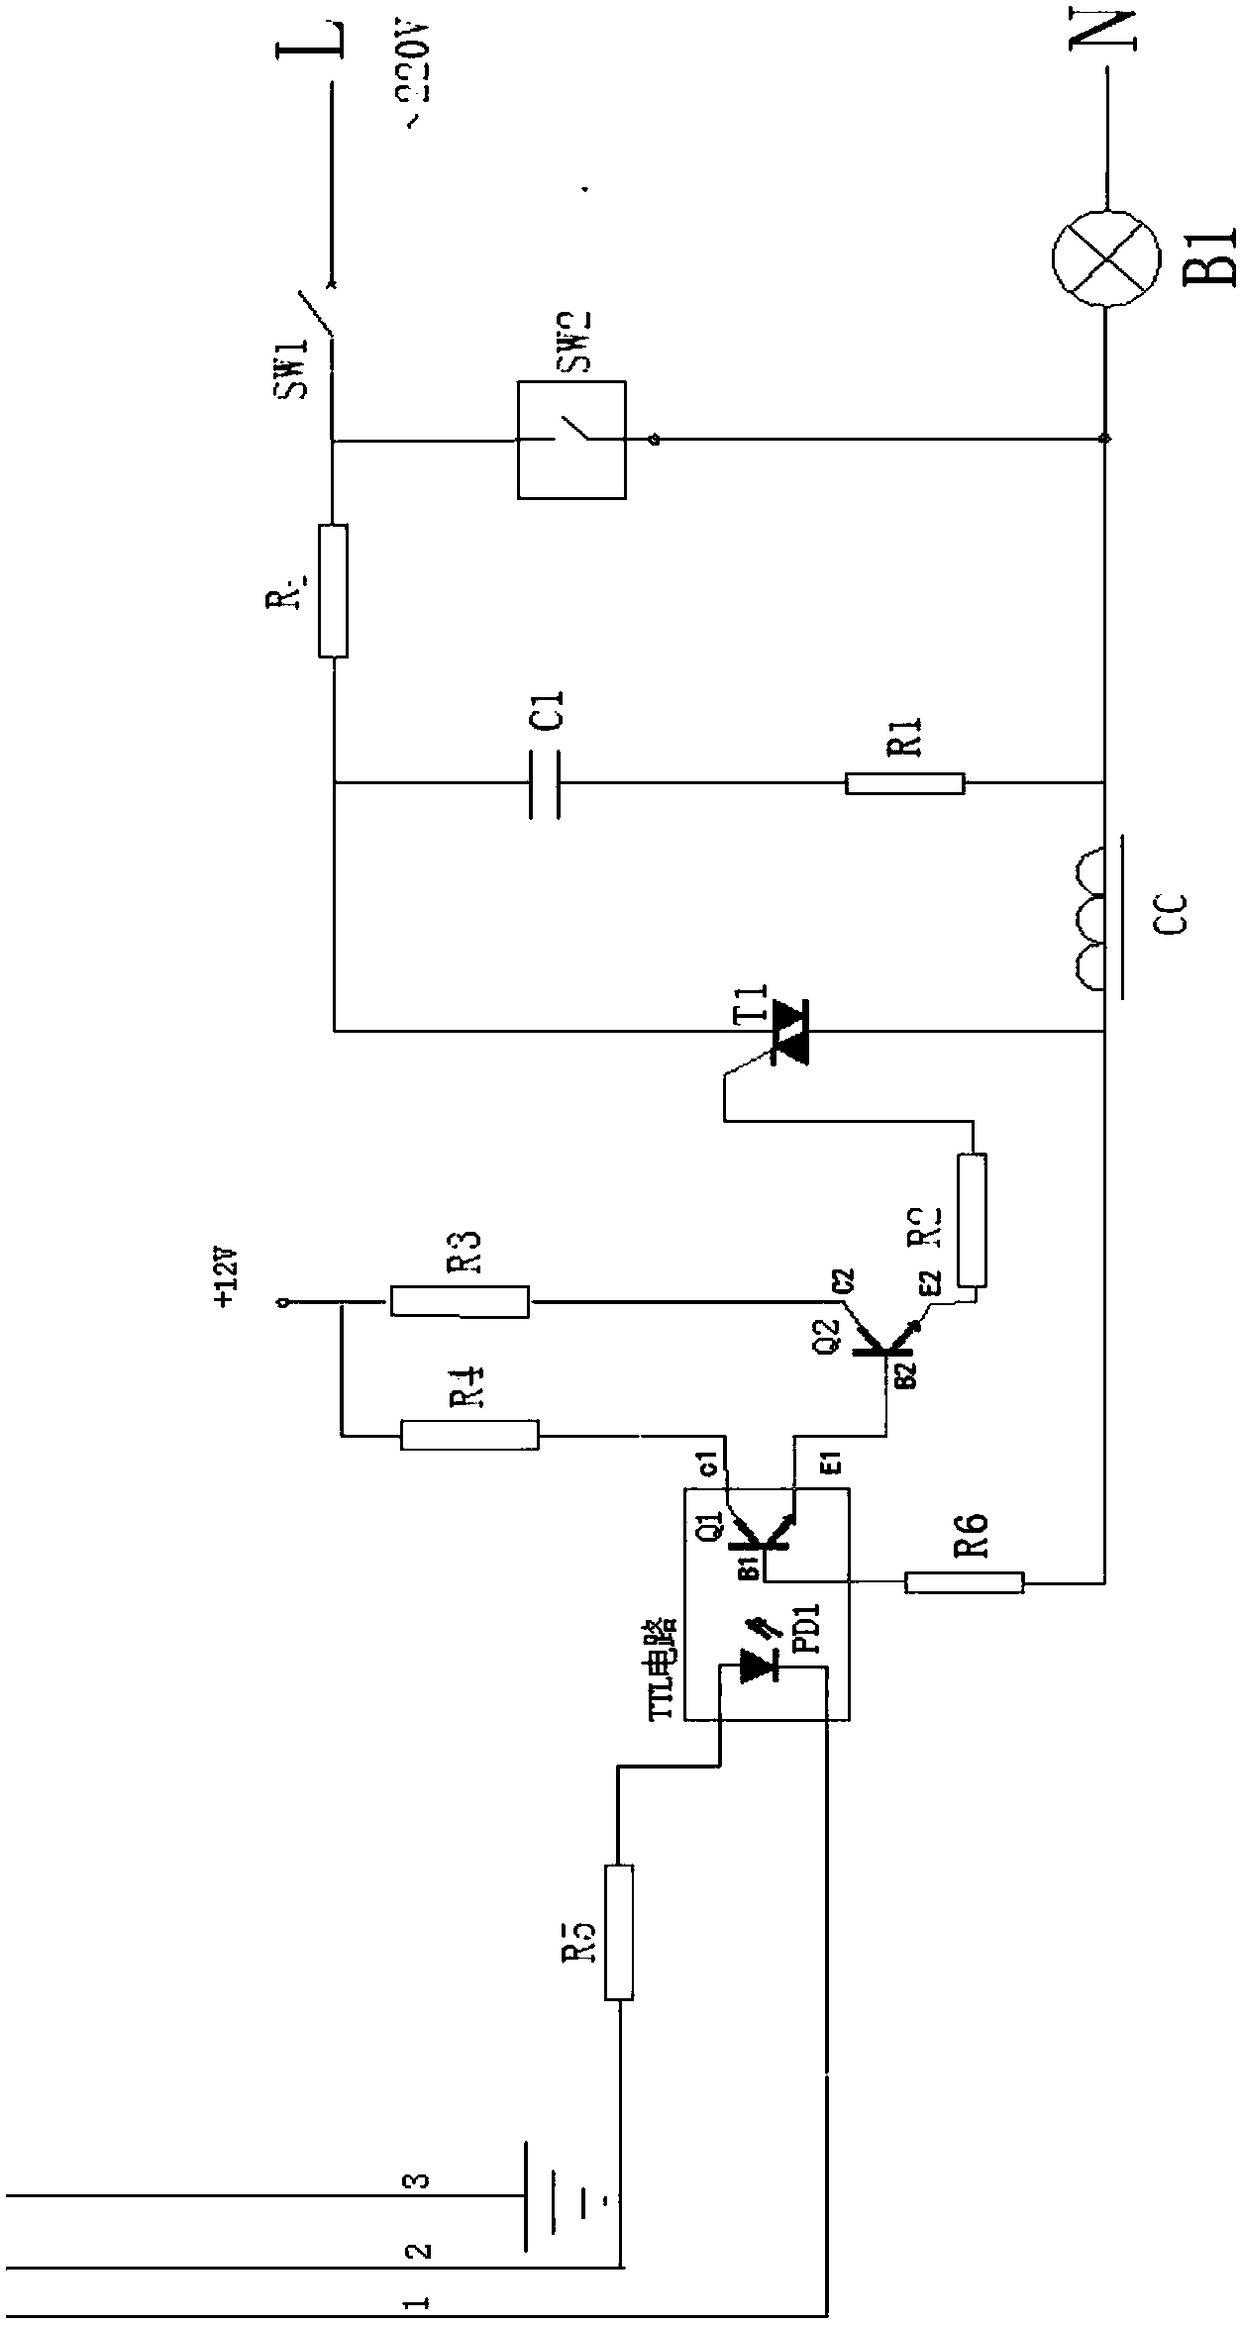 An intelligent dimming controller suitable for dimming in large-area spaces